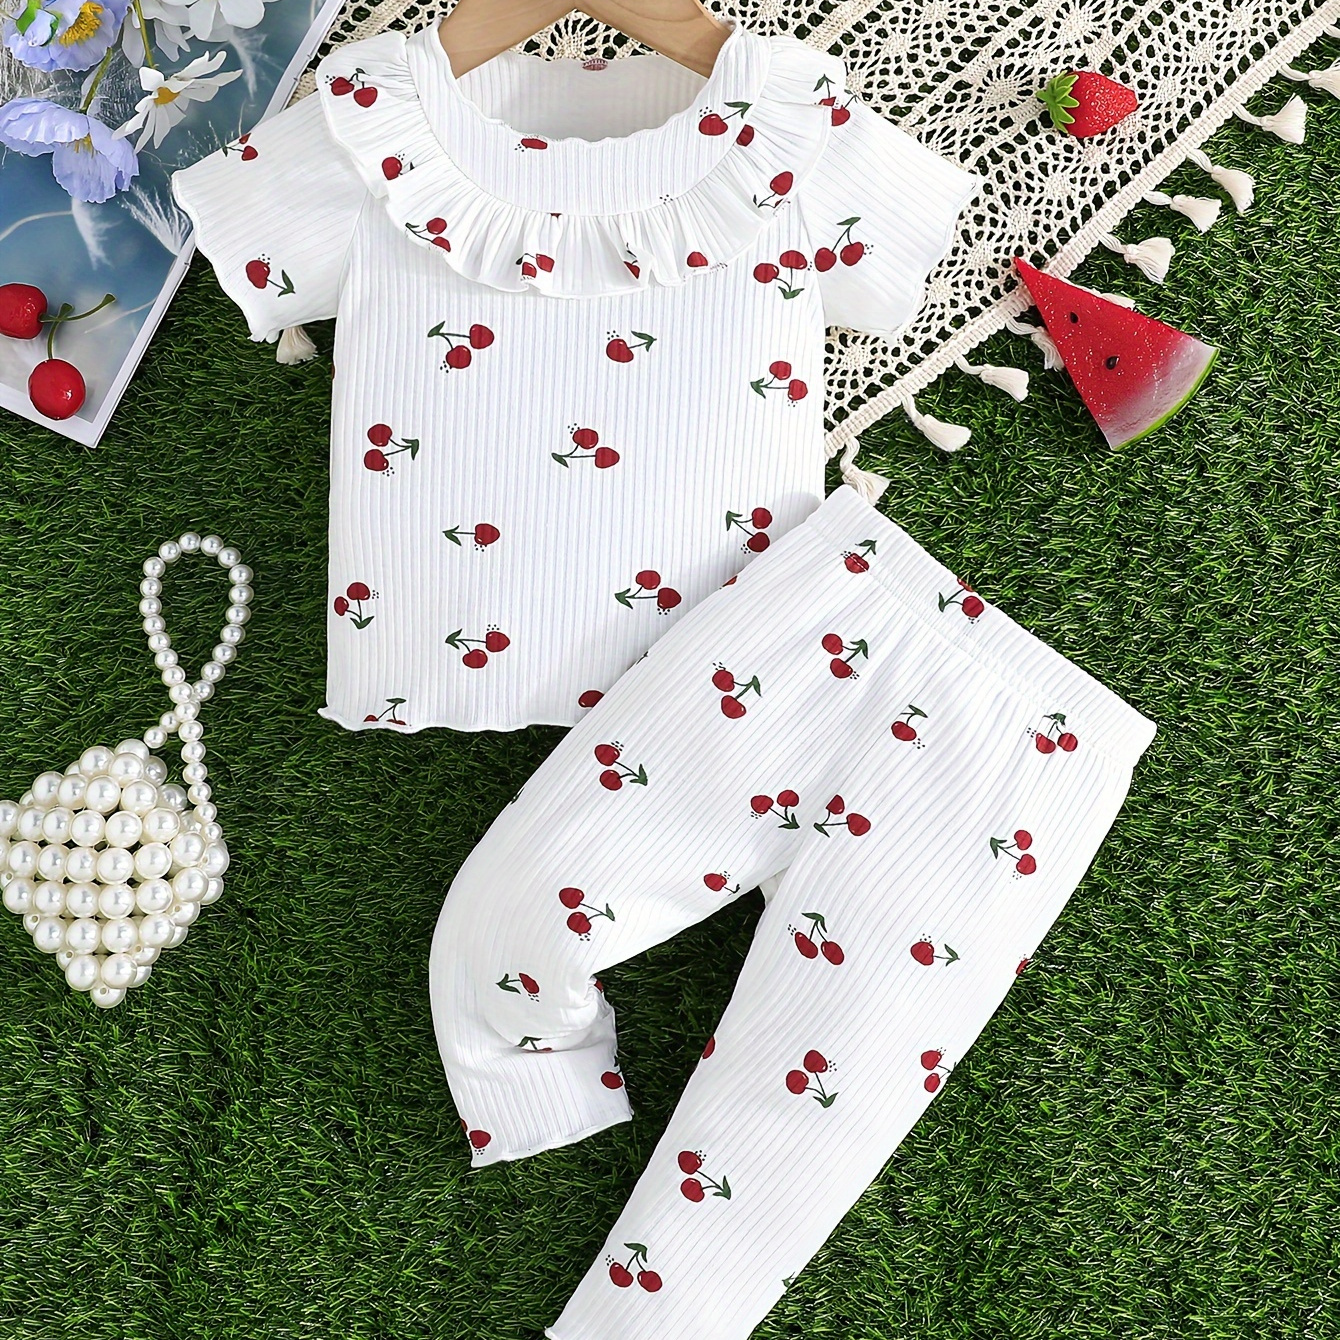 

Baby's Cherry Full Print 2pcs Casual Spring/summer Outfit, Ruffle Decor Ribbed T-shirt & Pants Set, Toddler & Infant Girl's Clothes For Daily/holiday/party